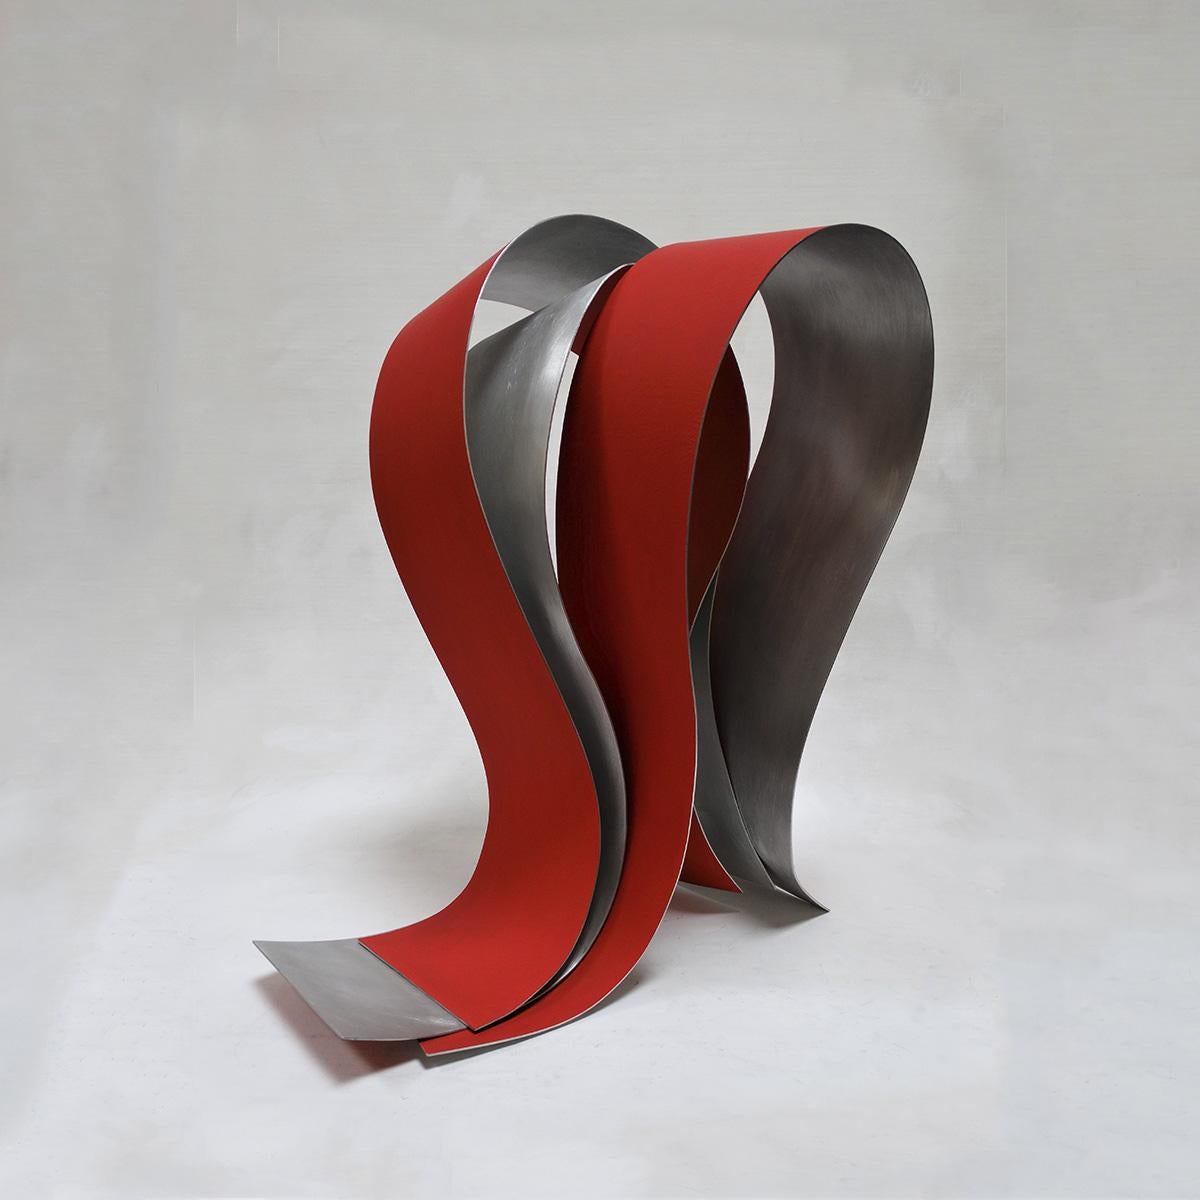 Acull 60 - Abstract, Outdoor Sculpture, Contemporary, Art, Red, Rafael Amorós For Sale 1